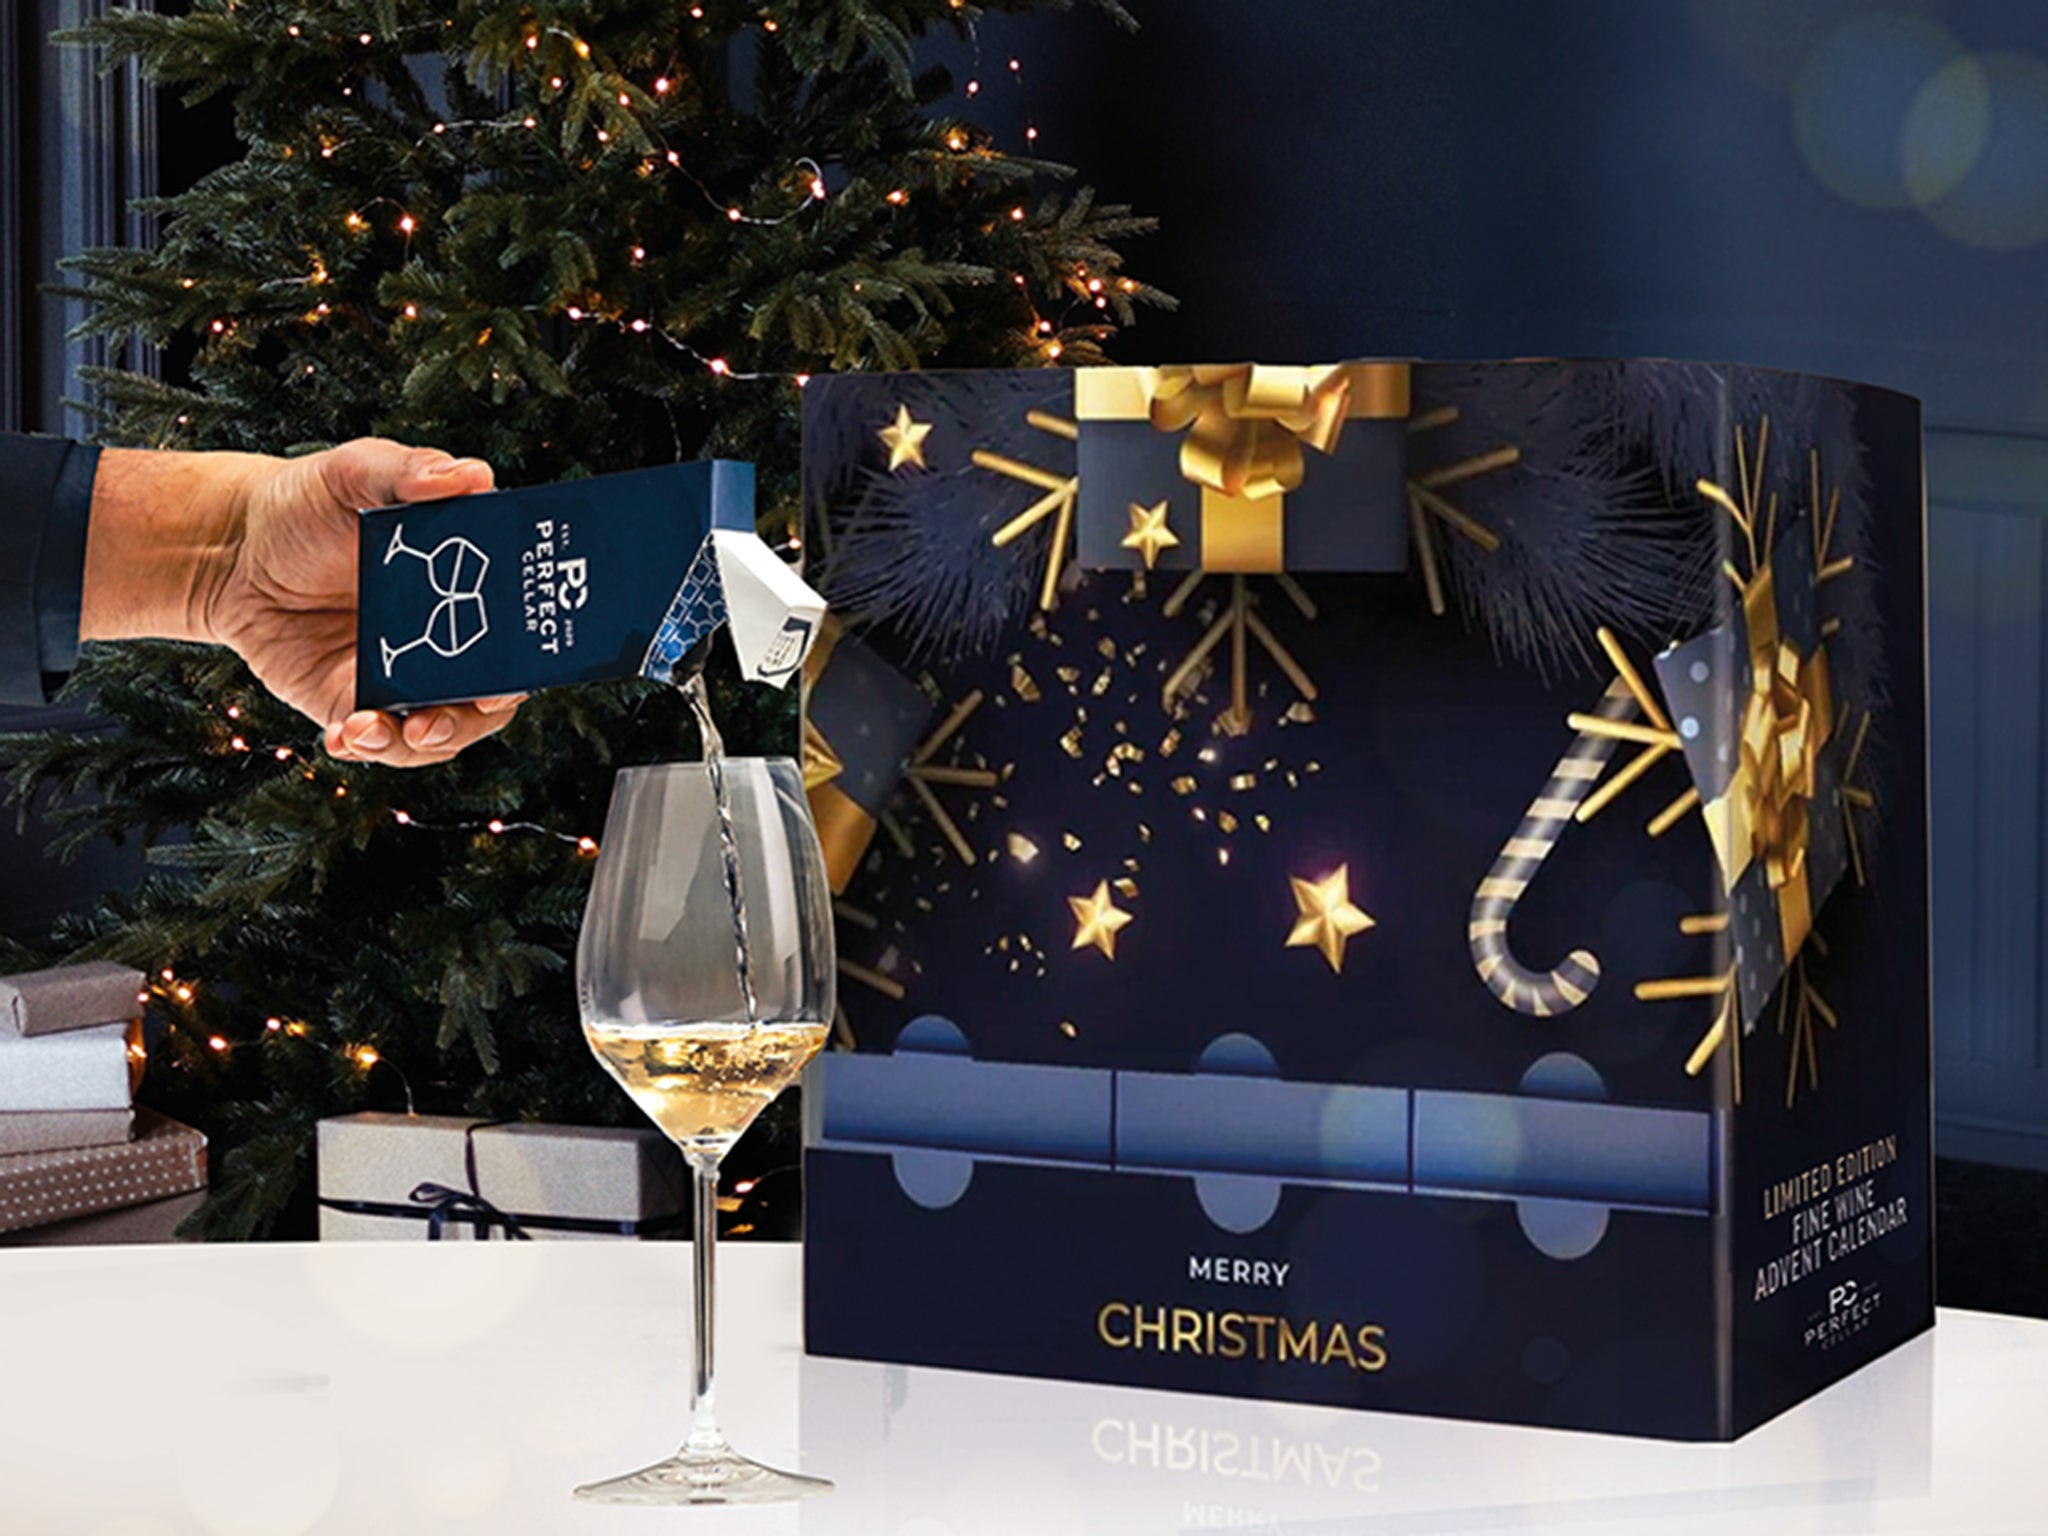 Count down to Christmas with 24 super premium wines